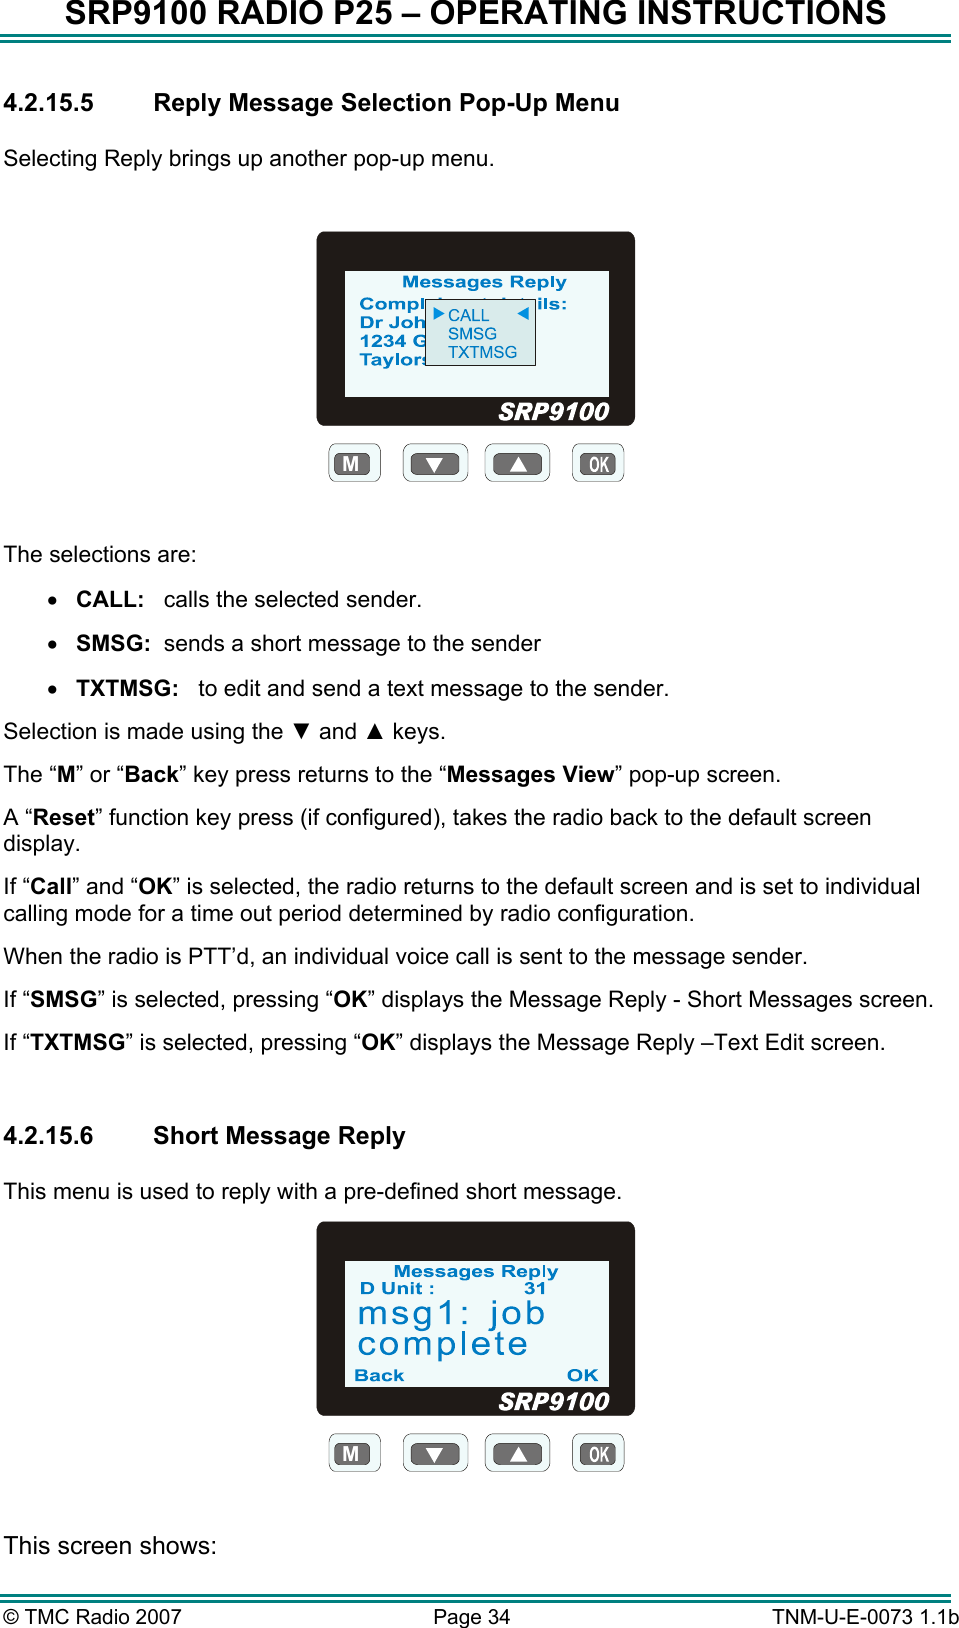 SRP9100 RADIO P25 – OPERATING INSTRUCTIONS 4.2.15.5 Reply Message Selection Pop-Up Menu  Selecting Reply brings up another pop-up menu.  M  The selections are: •  CALL:   calls the selected sender. •  SMSG:  sends a short message to the sender •  TXTMSG:   to edit and send a text message to the sender. Selection is made using the ▼ and ▲ keys. The “M” or “Back” key press returns to the “Messages View” pop-up screen. A “Reset” function key press (if configured), takes the radio back to the default screen display. If “Call” and “OK” is selected, the radio returns to the default screen and is set to individual calling mode for a time out period determined by radio configuration. When the radio is PTT’d, an individual voice call is sent to the message sender. If “SMSG” is selected, pressing “OK” displays the Message Reply - Short Messages screen. If “TXTMSG” is selected, pressing “OK” displays the Message Reply –Text Edit screen.  4.2.15.6  Short Message Reply  This menu is used to reply with a pre-defined short message. M  This screen shows: © TMC Radio 2007  Page 34   TNM-U-E-0073 1.1b 